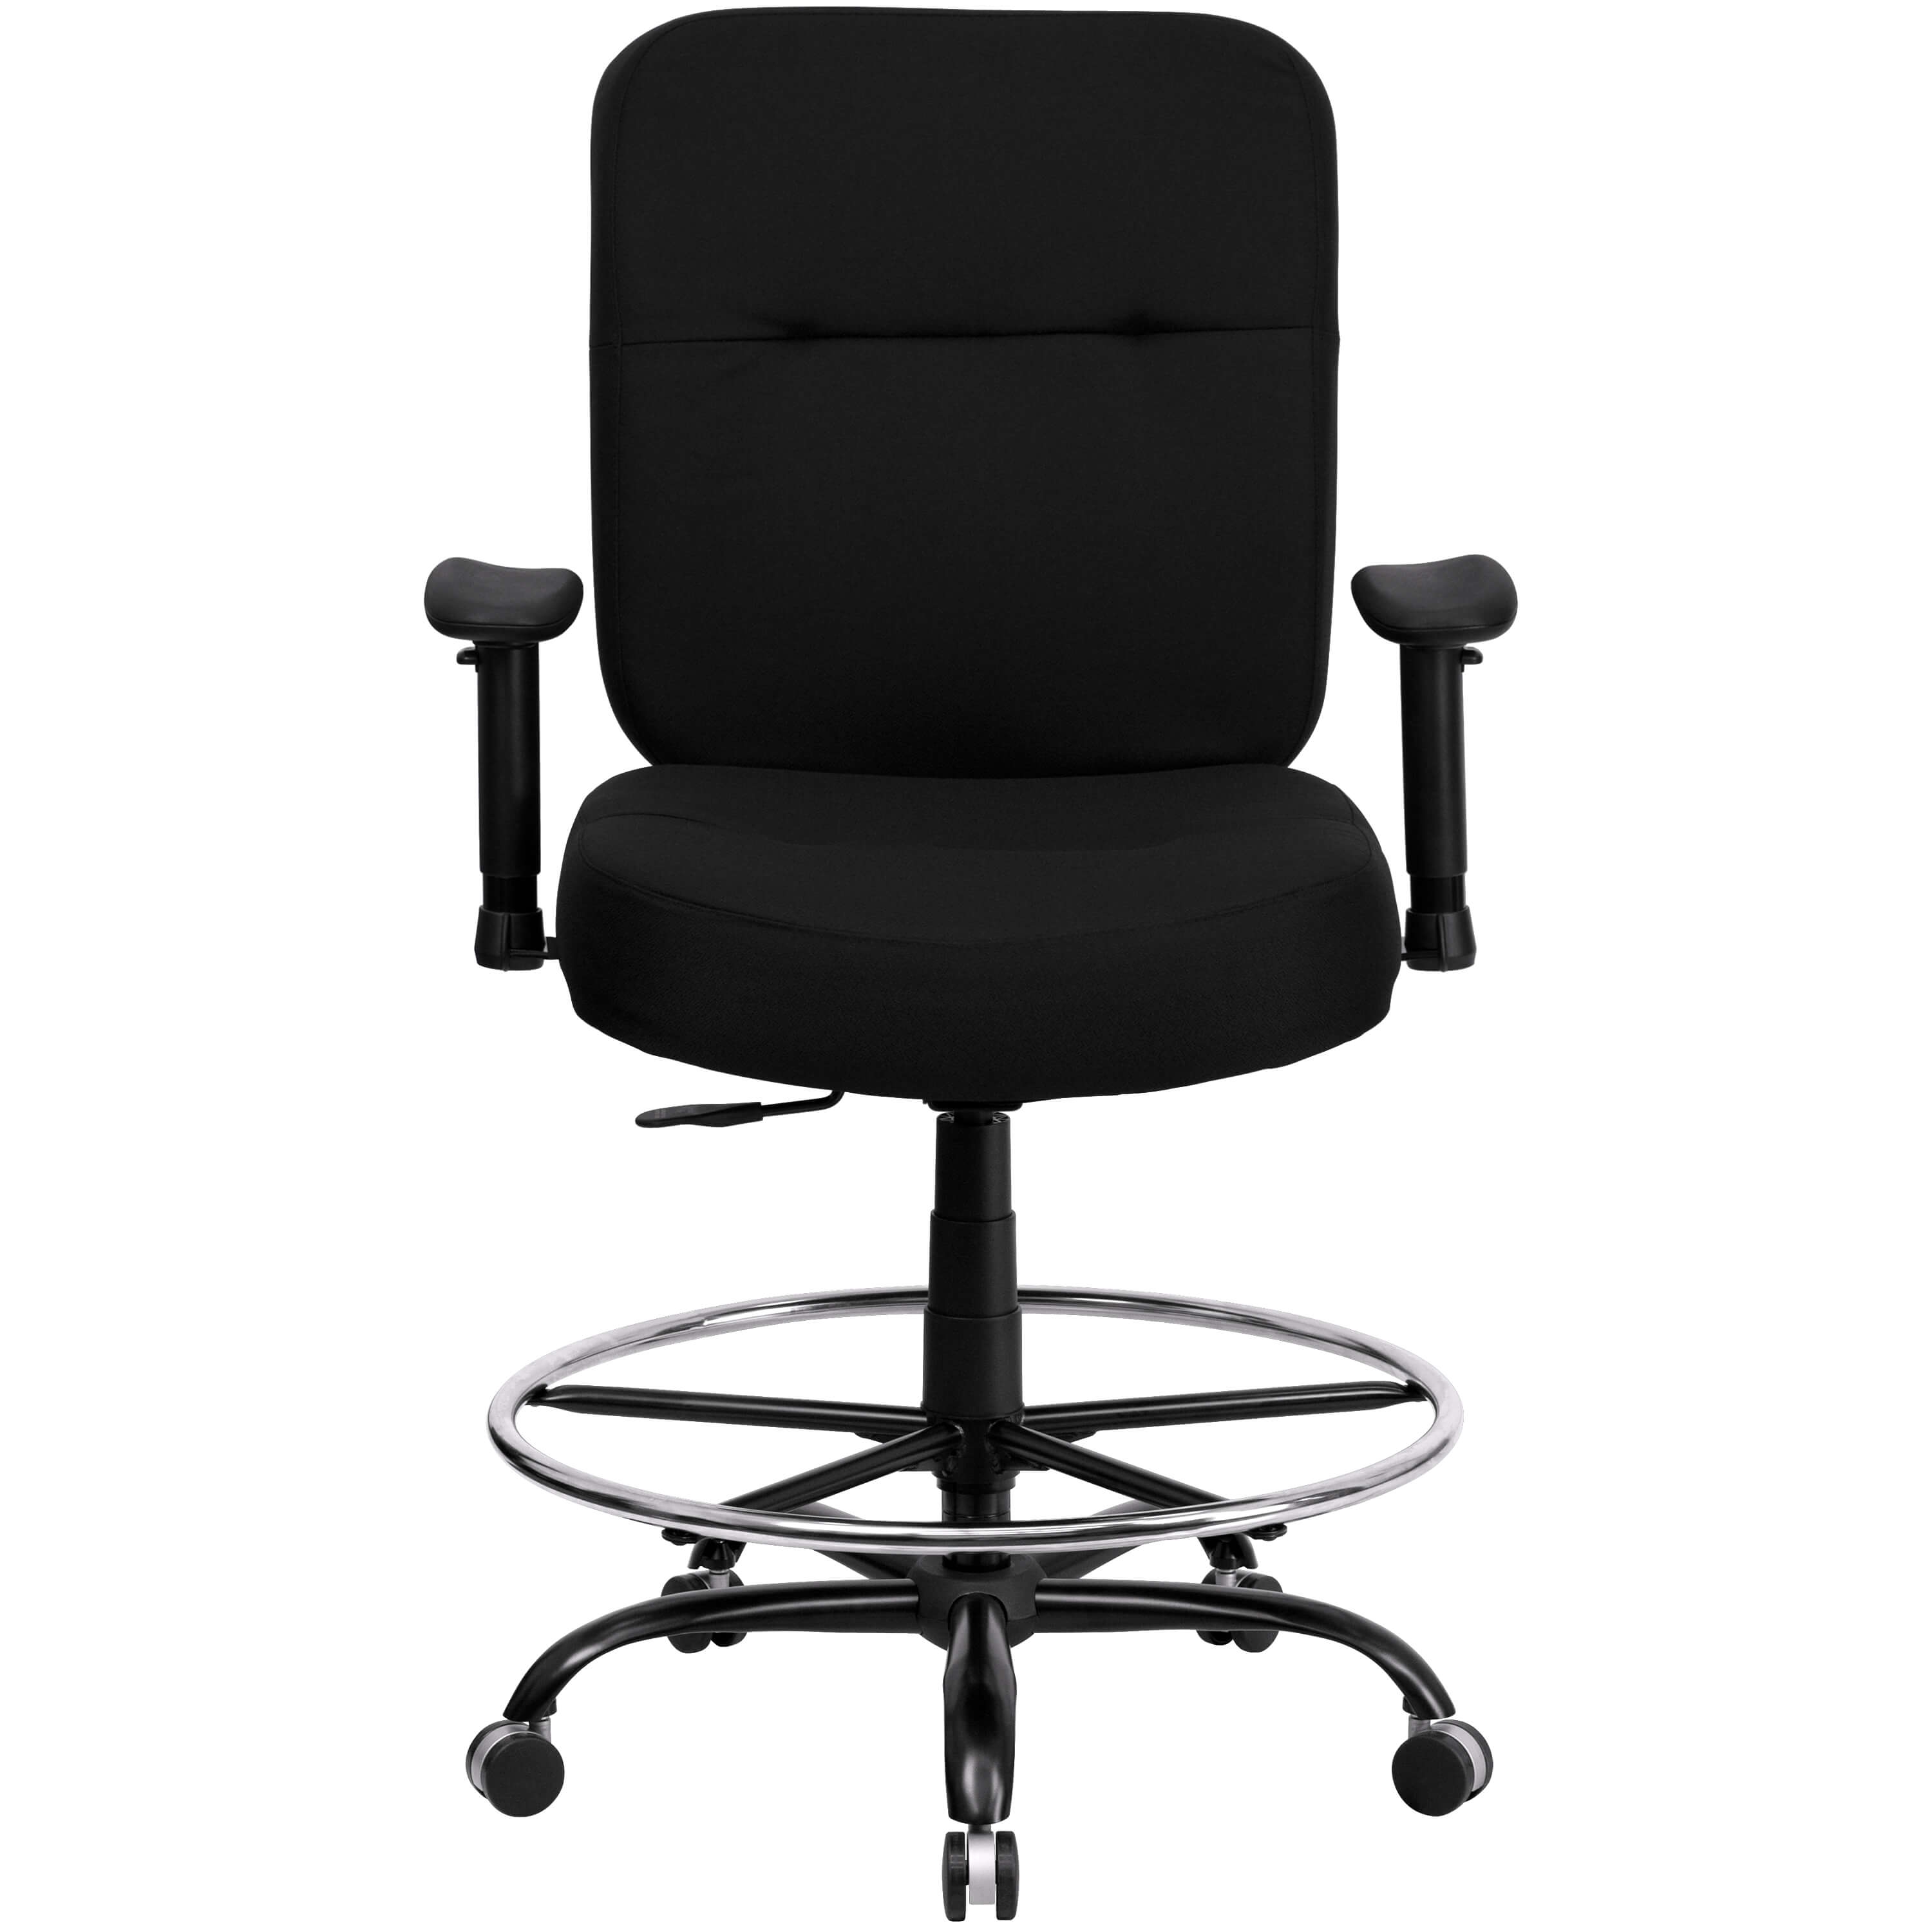 Large size office chairs front view